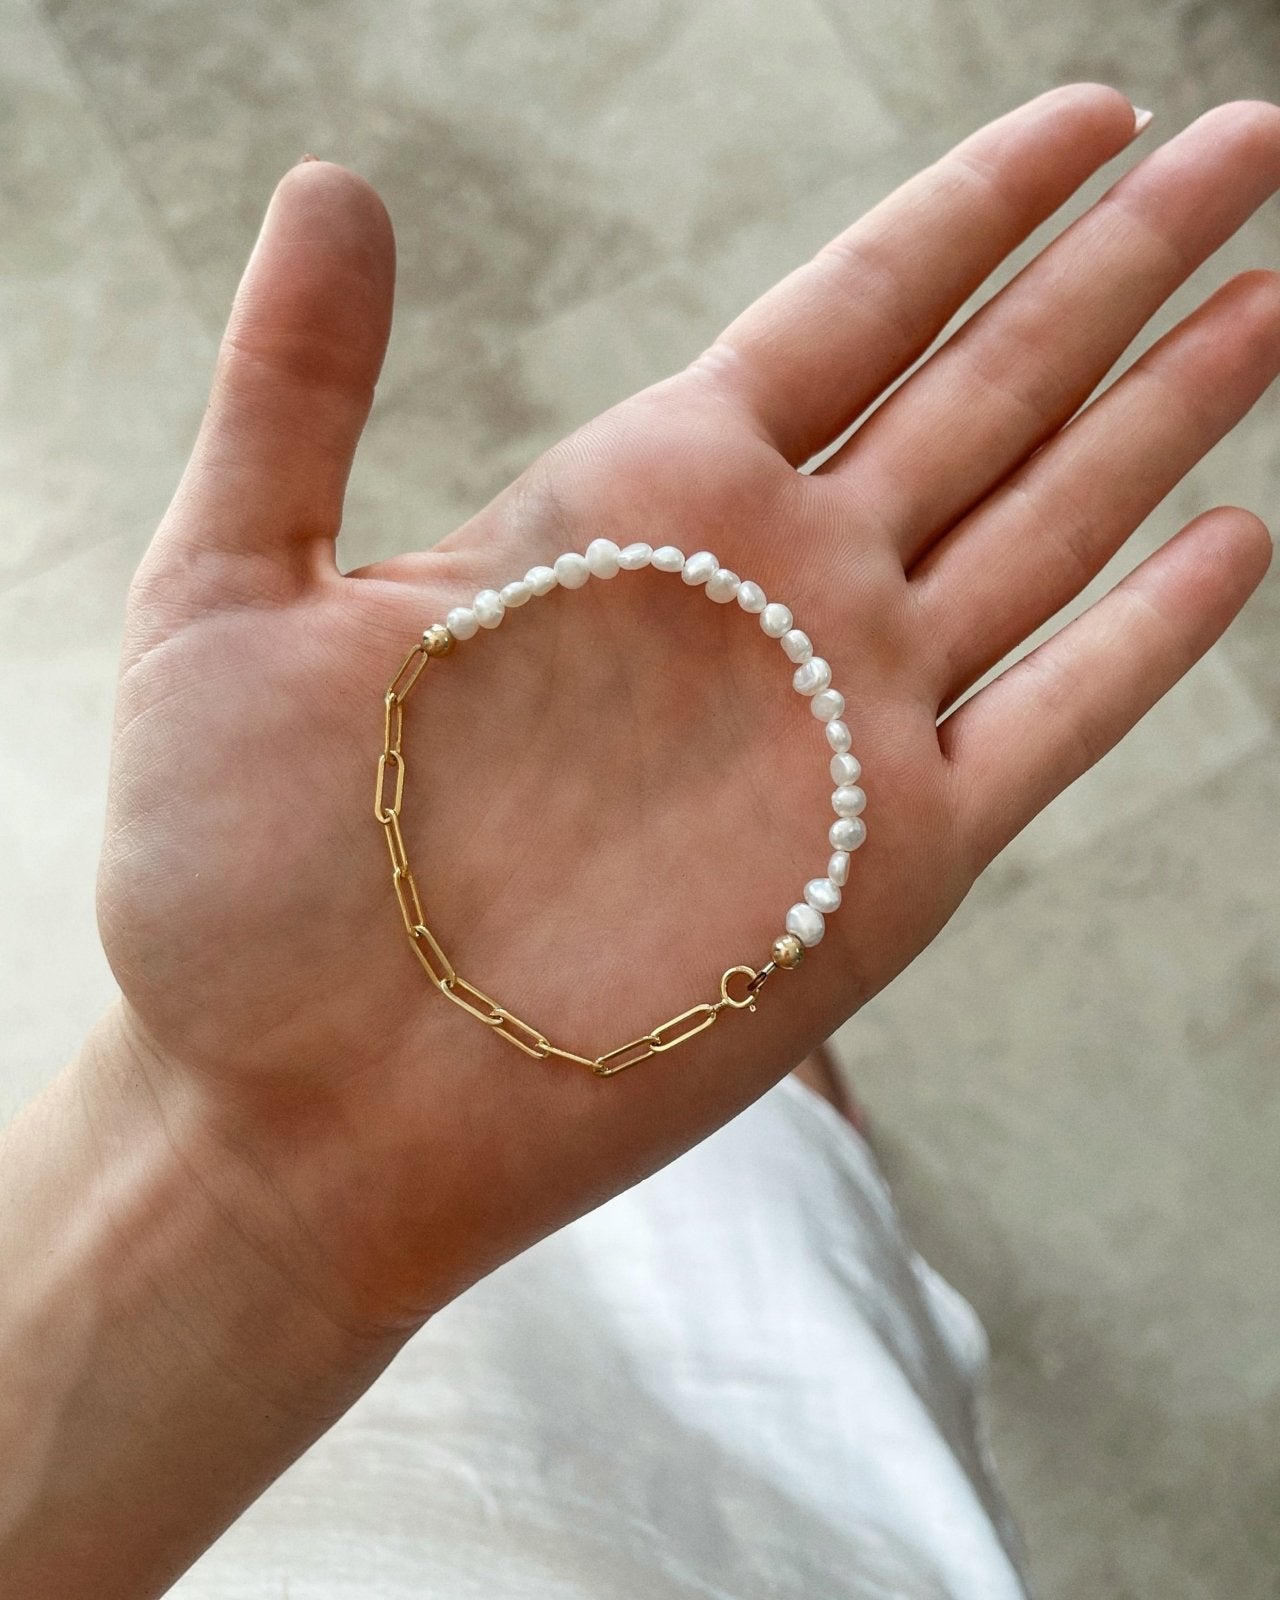 Load image into Gallery viewer, HALF FRESHWATER PEARL BEADED BRACELET - The Littl - 14k Yellow Gold Fill - 16cm
